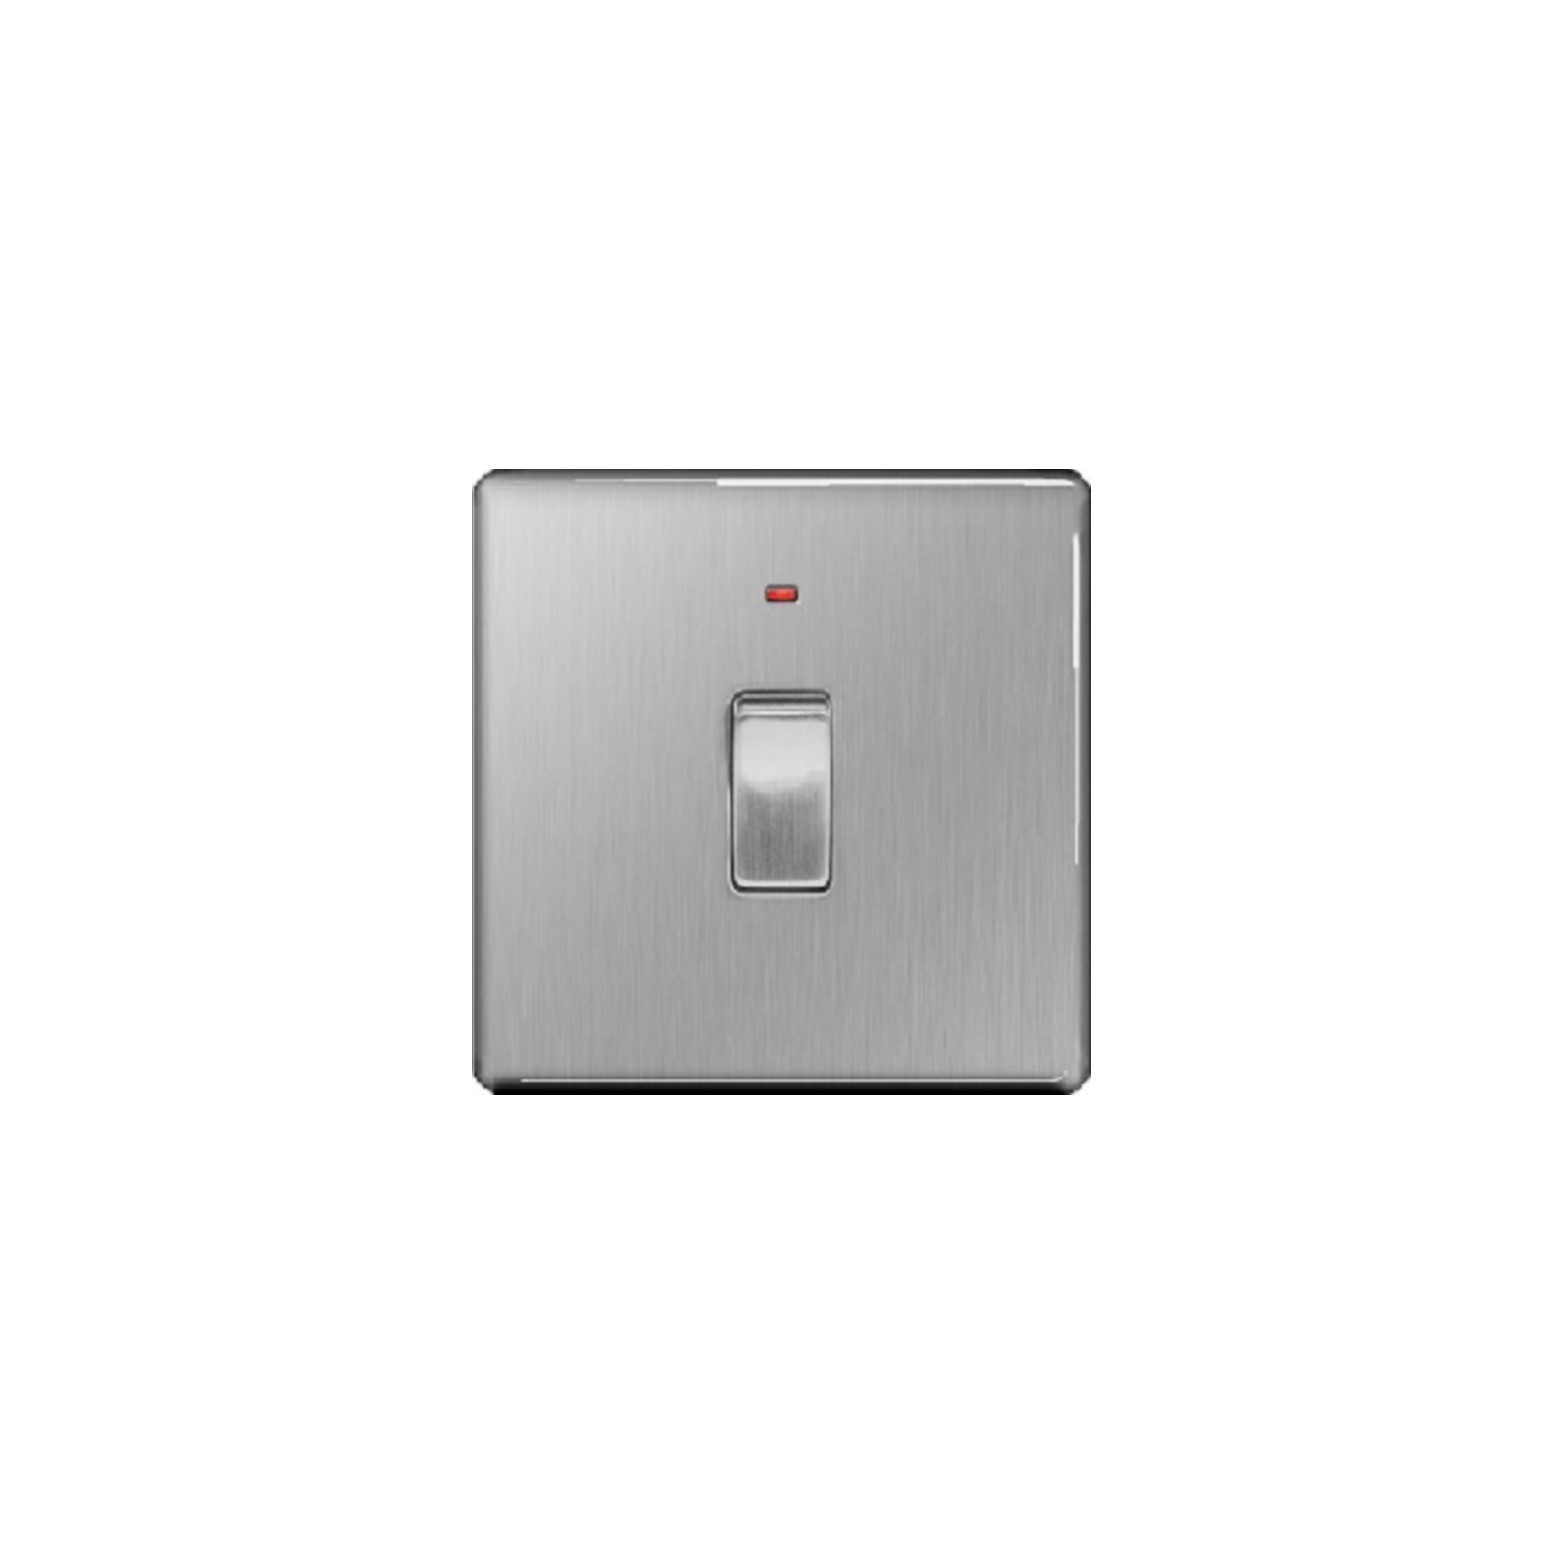 Flatplate Brushed Steel 20Amp Double Pole Switch, high power consumption metal frontplate (FBS31 )